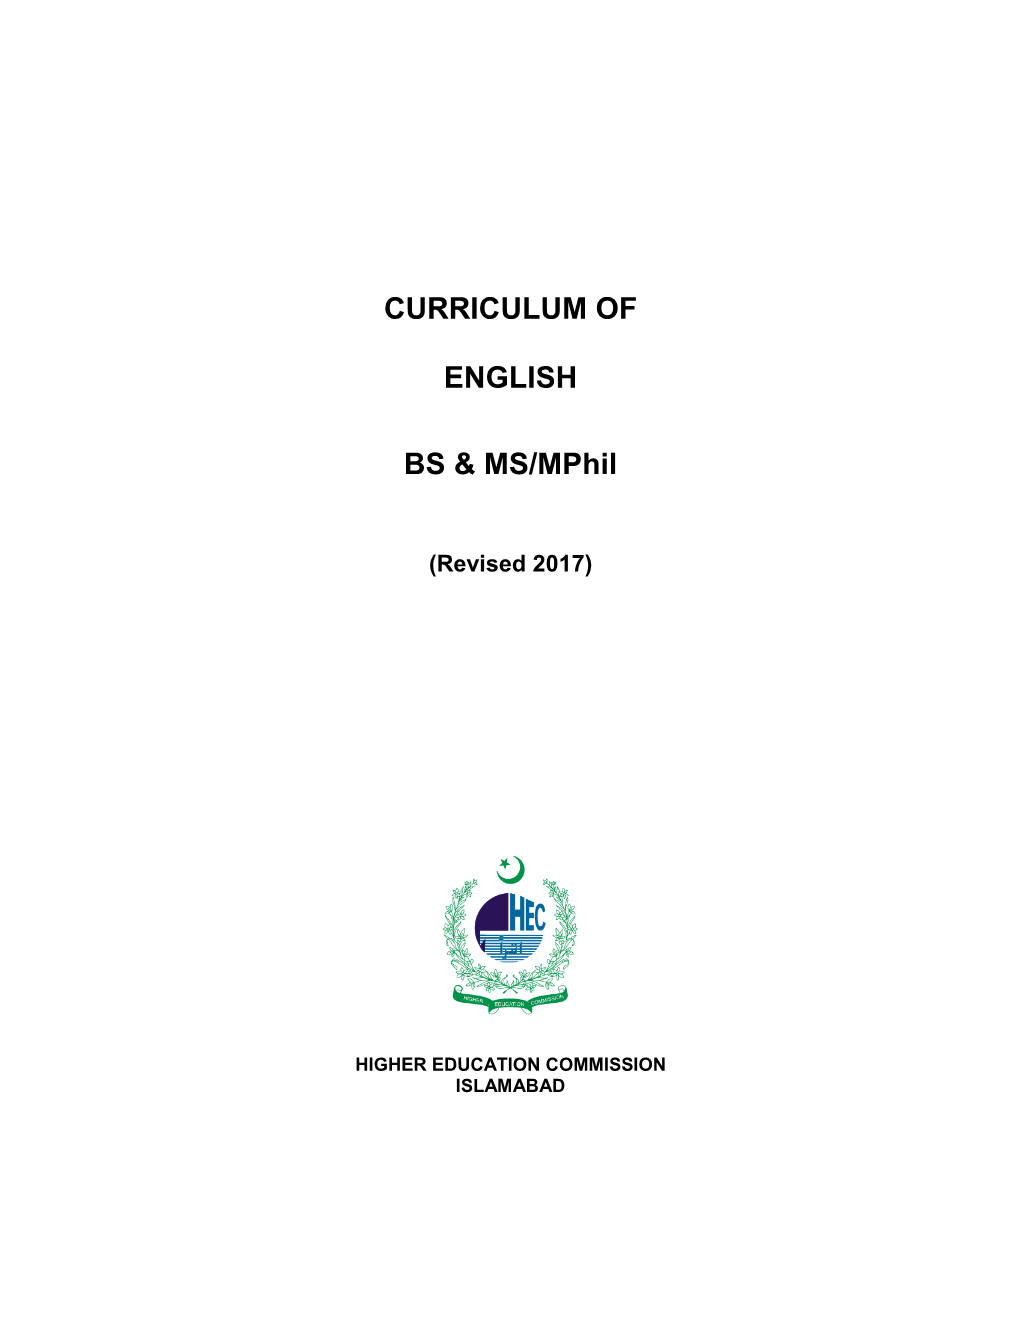 CURRICULUM of ENGLISH BS & MS/Mphil